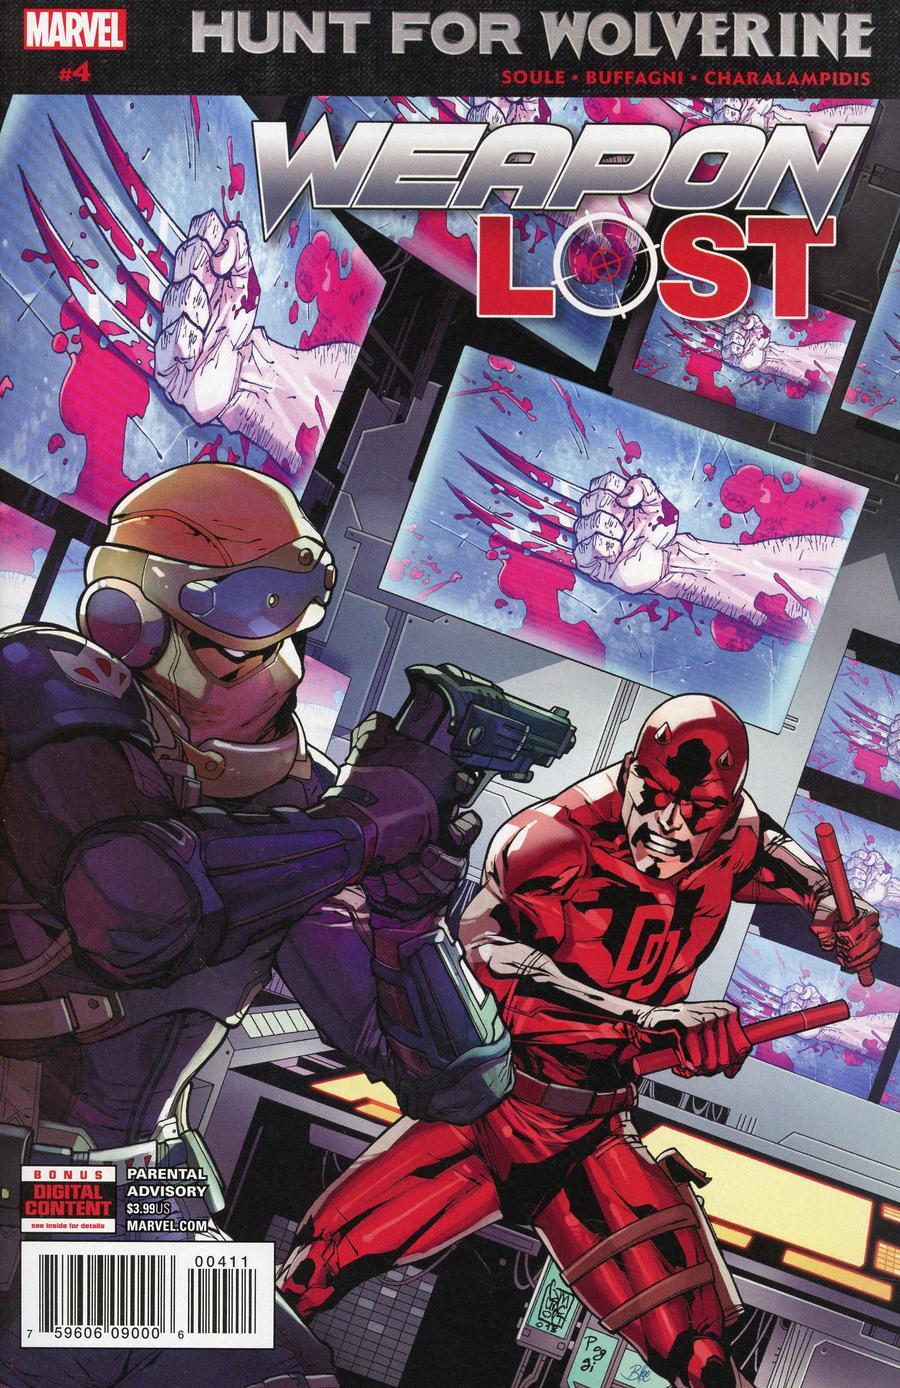 Hunt For Wolverine Weapon Lost Vol. 1 #4